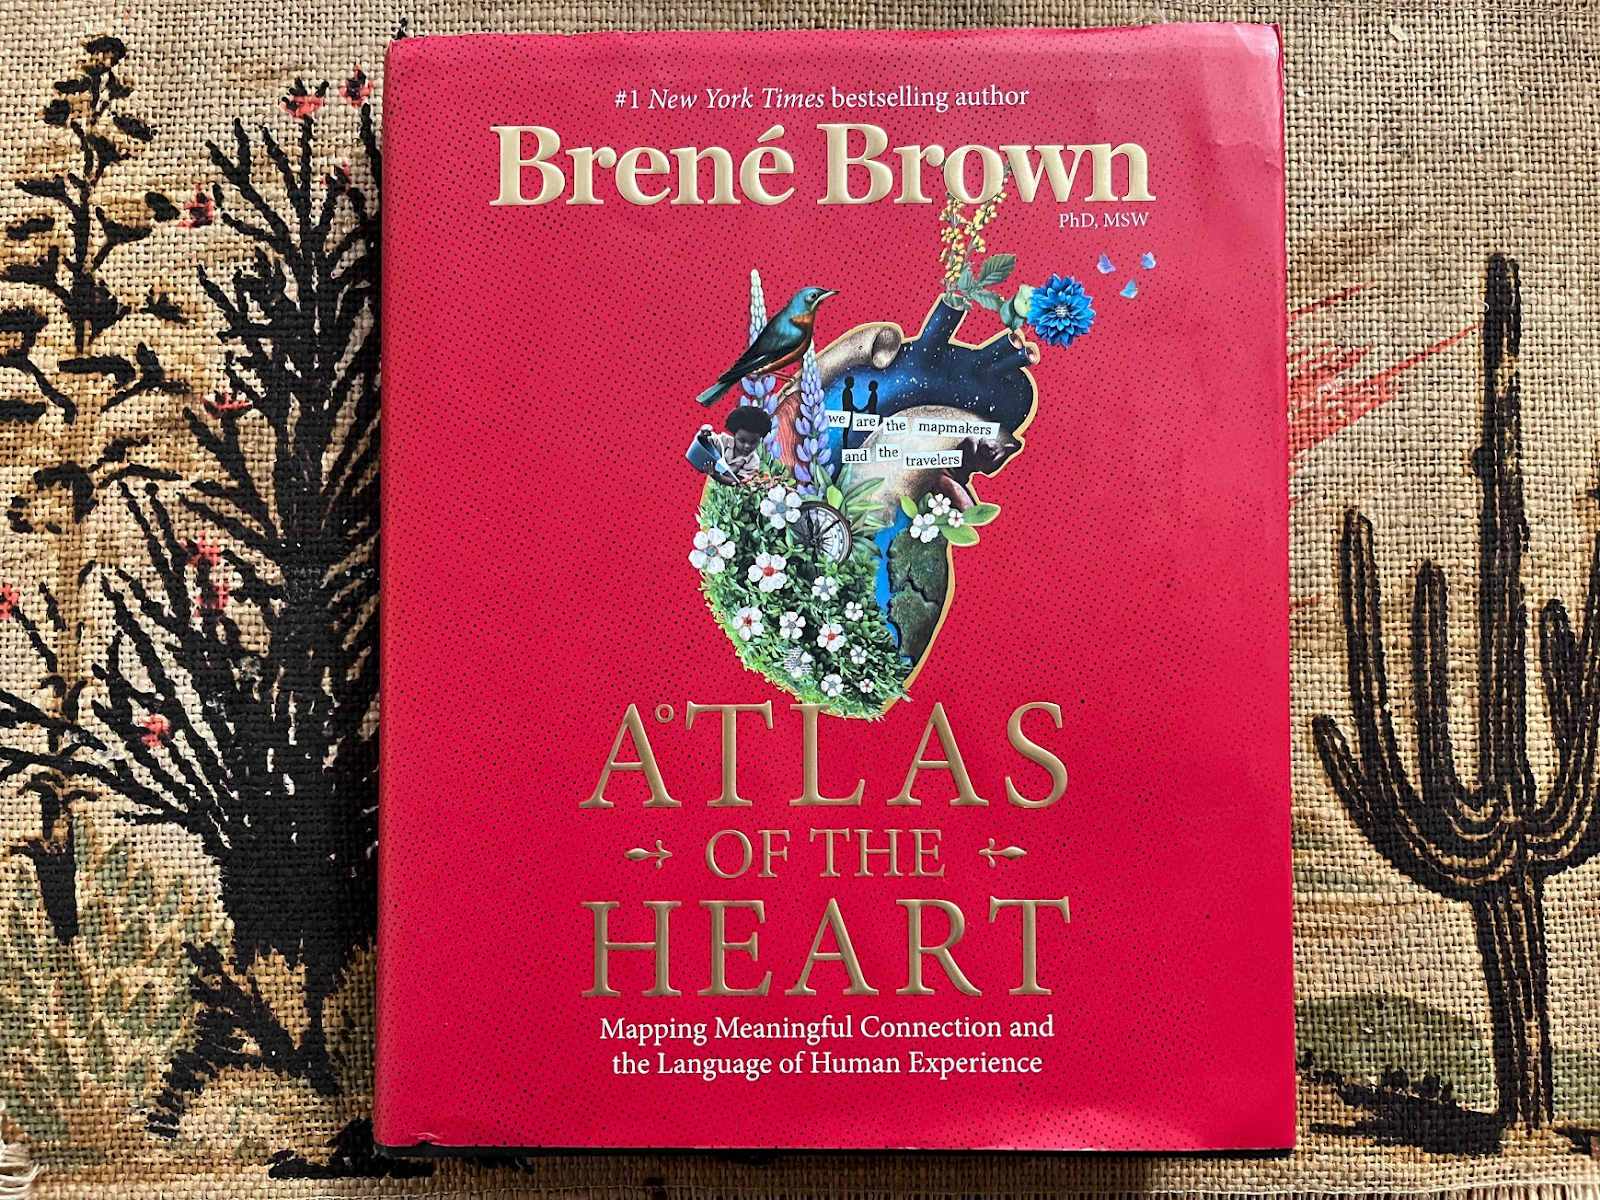 Cover shot of Atlas of the Heart by Dr. Brene Brown